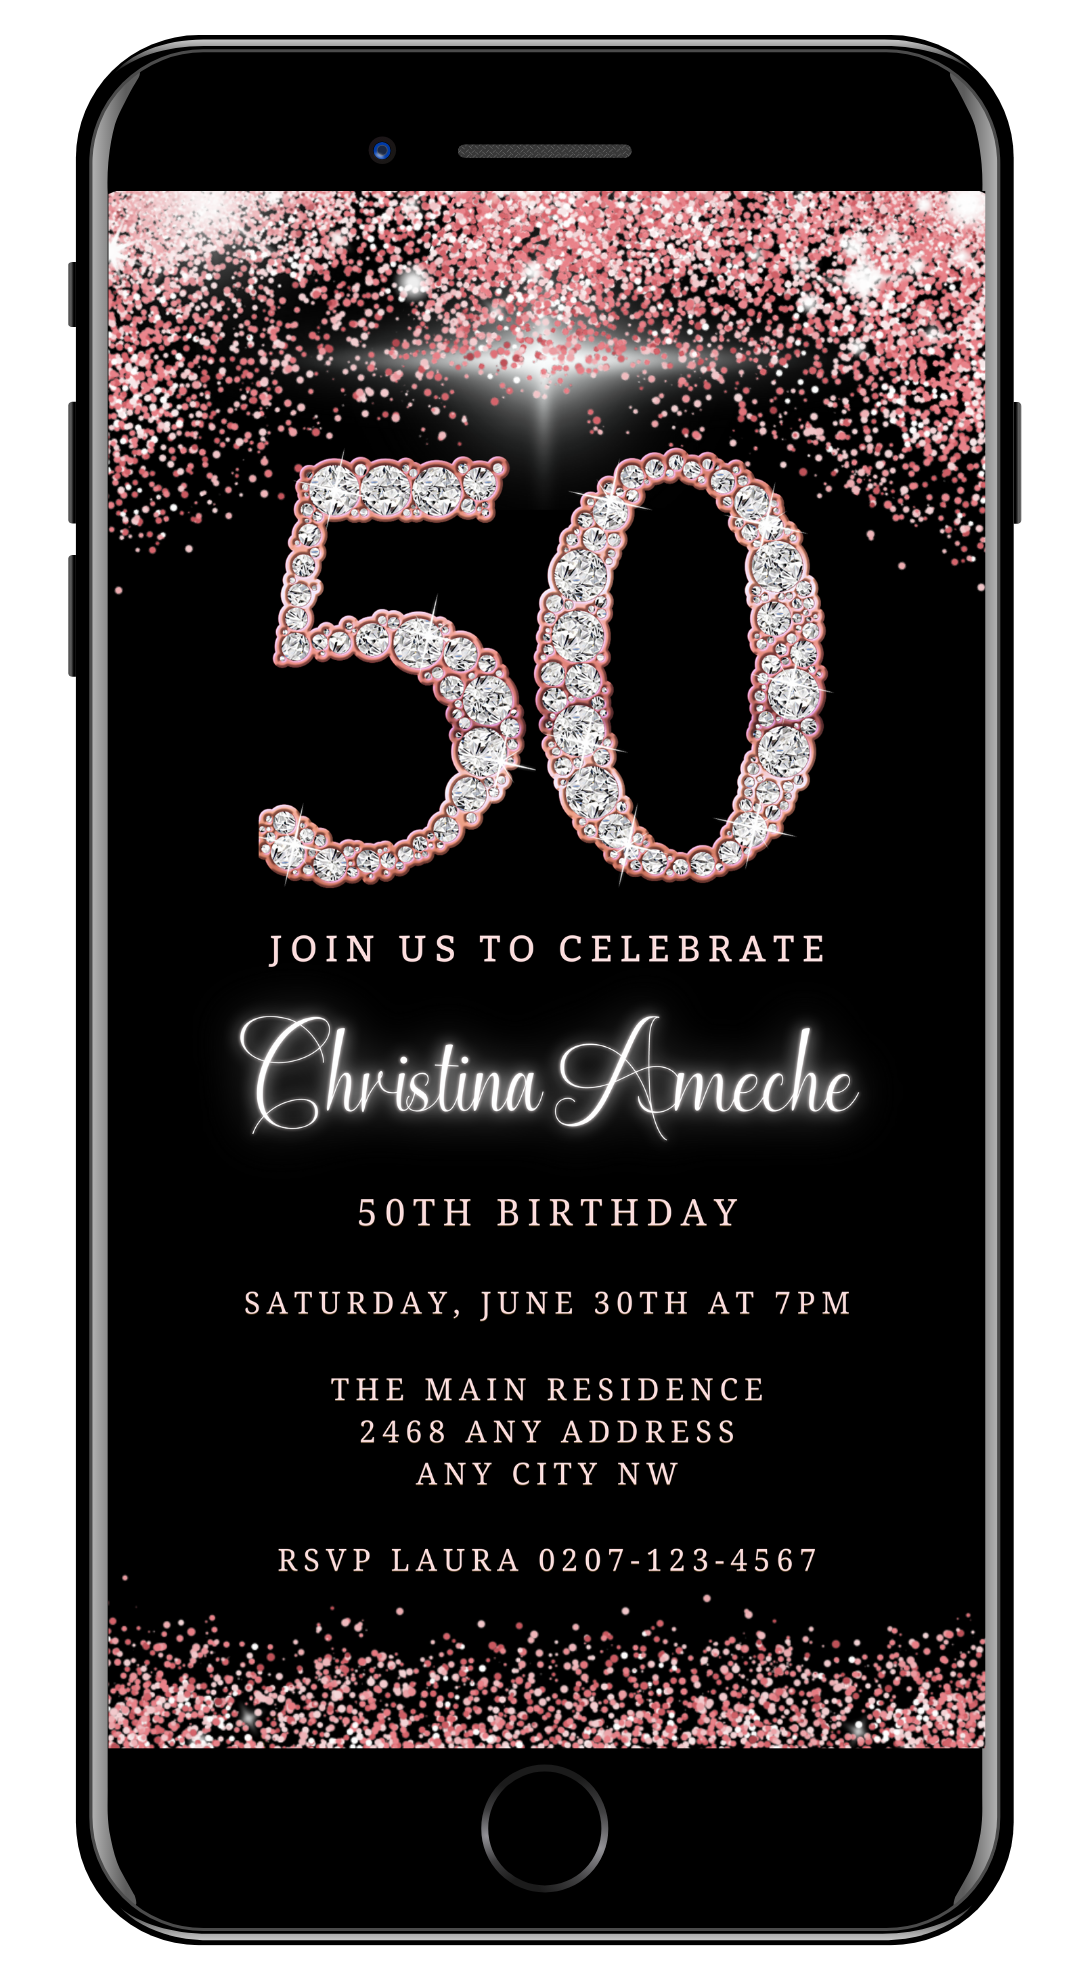 Rose Gold Diamond Glitter 50th Birthday Evite displayed on a smartphone screen, showcasing customizable text and diamond graphics for a digital invitation.